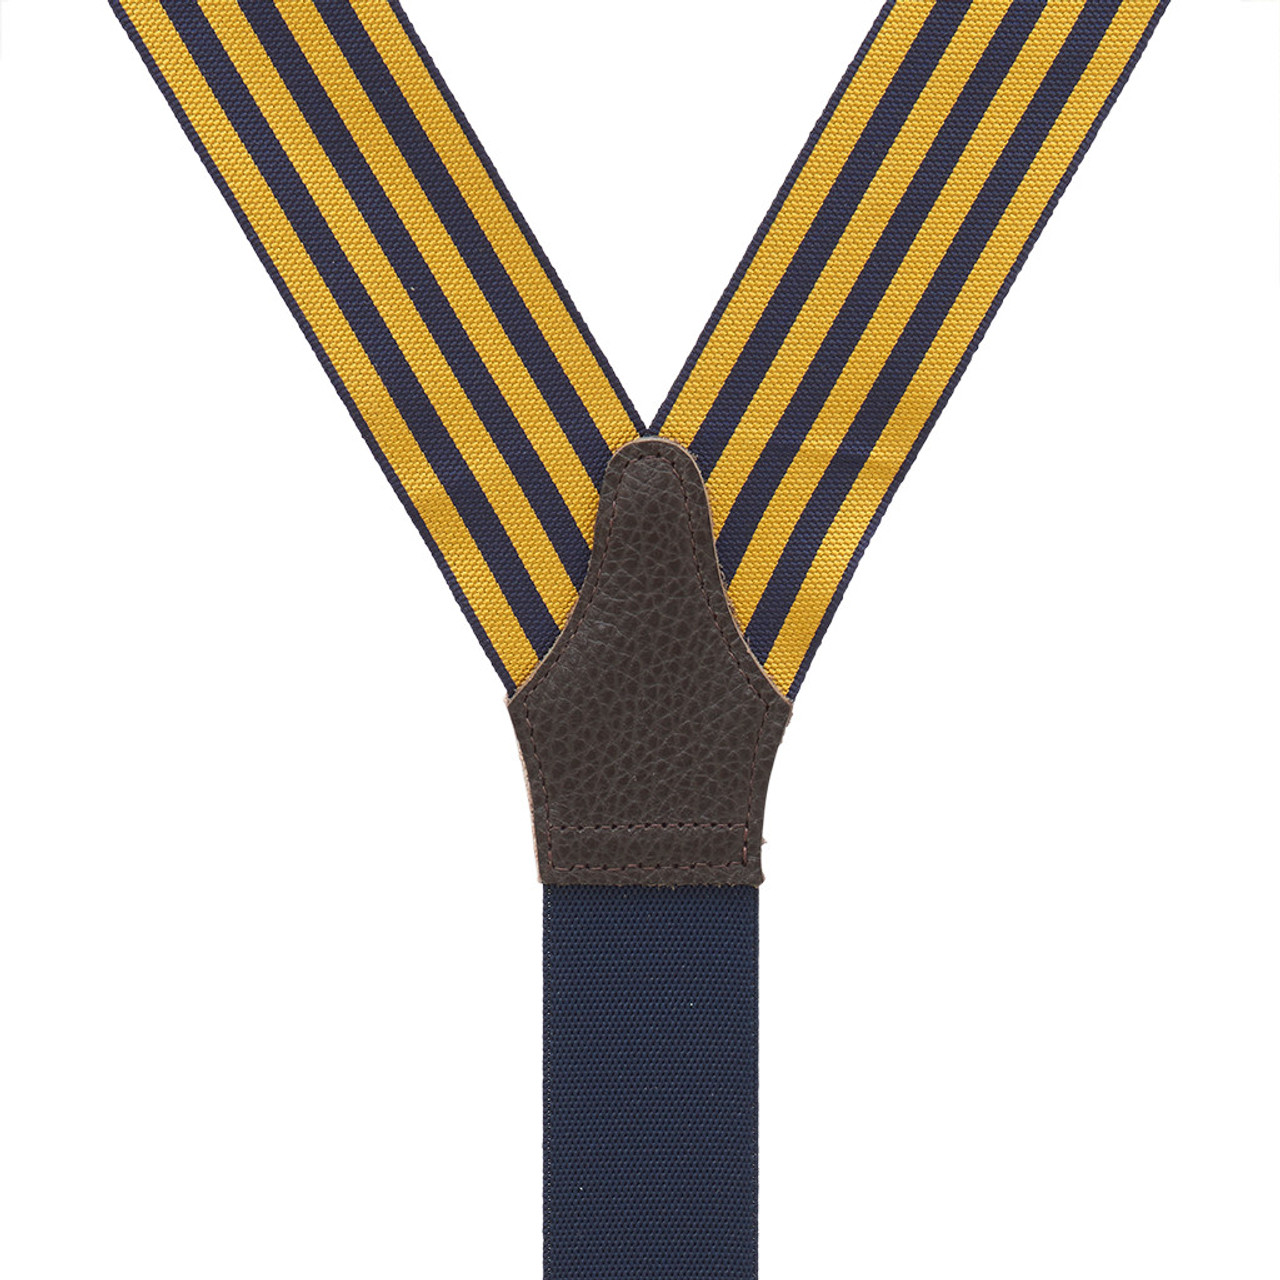 GOLD/NAVY EQUAL STRIPES Convertible Suspenders